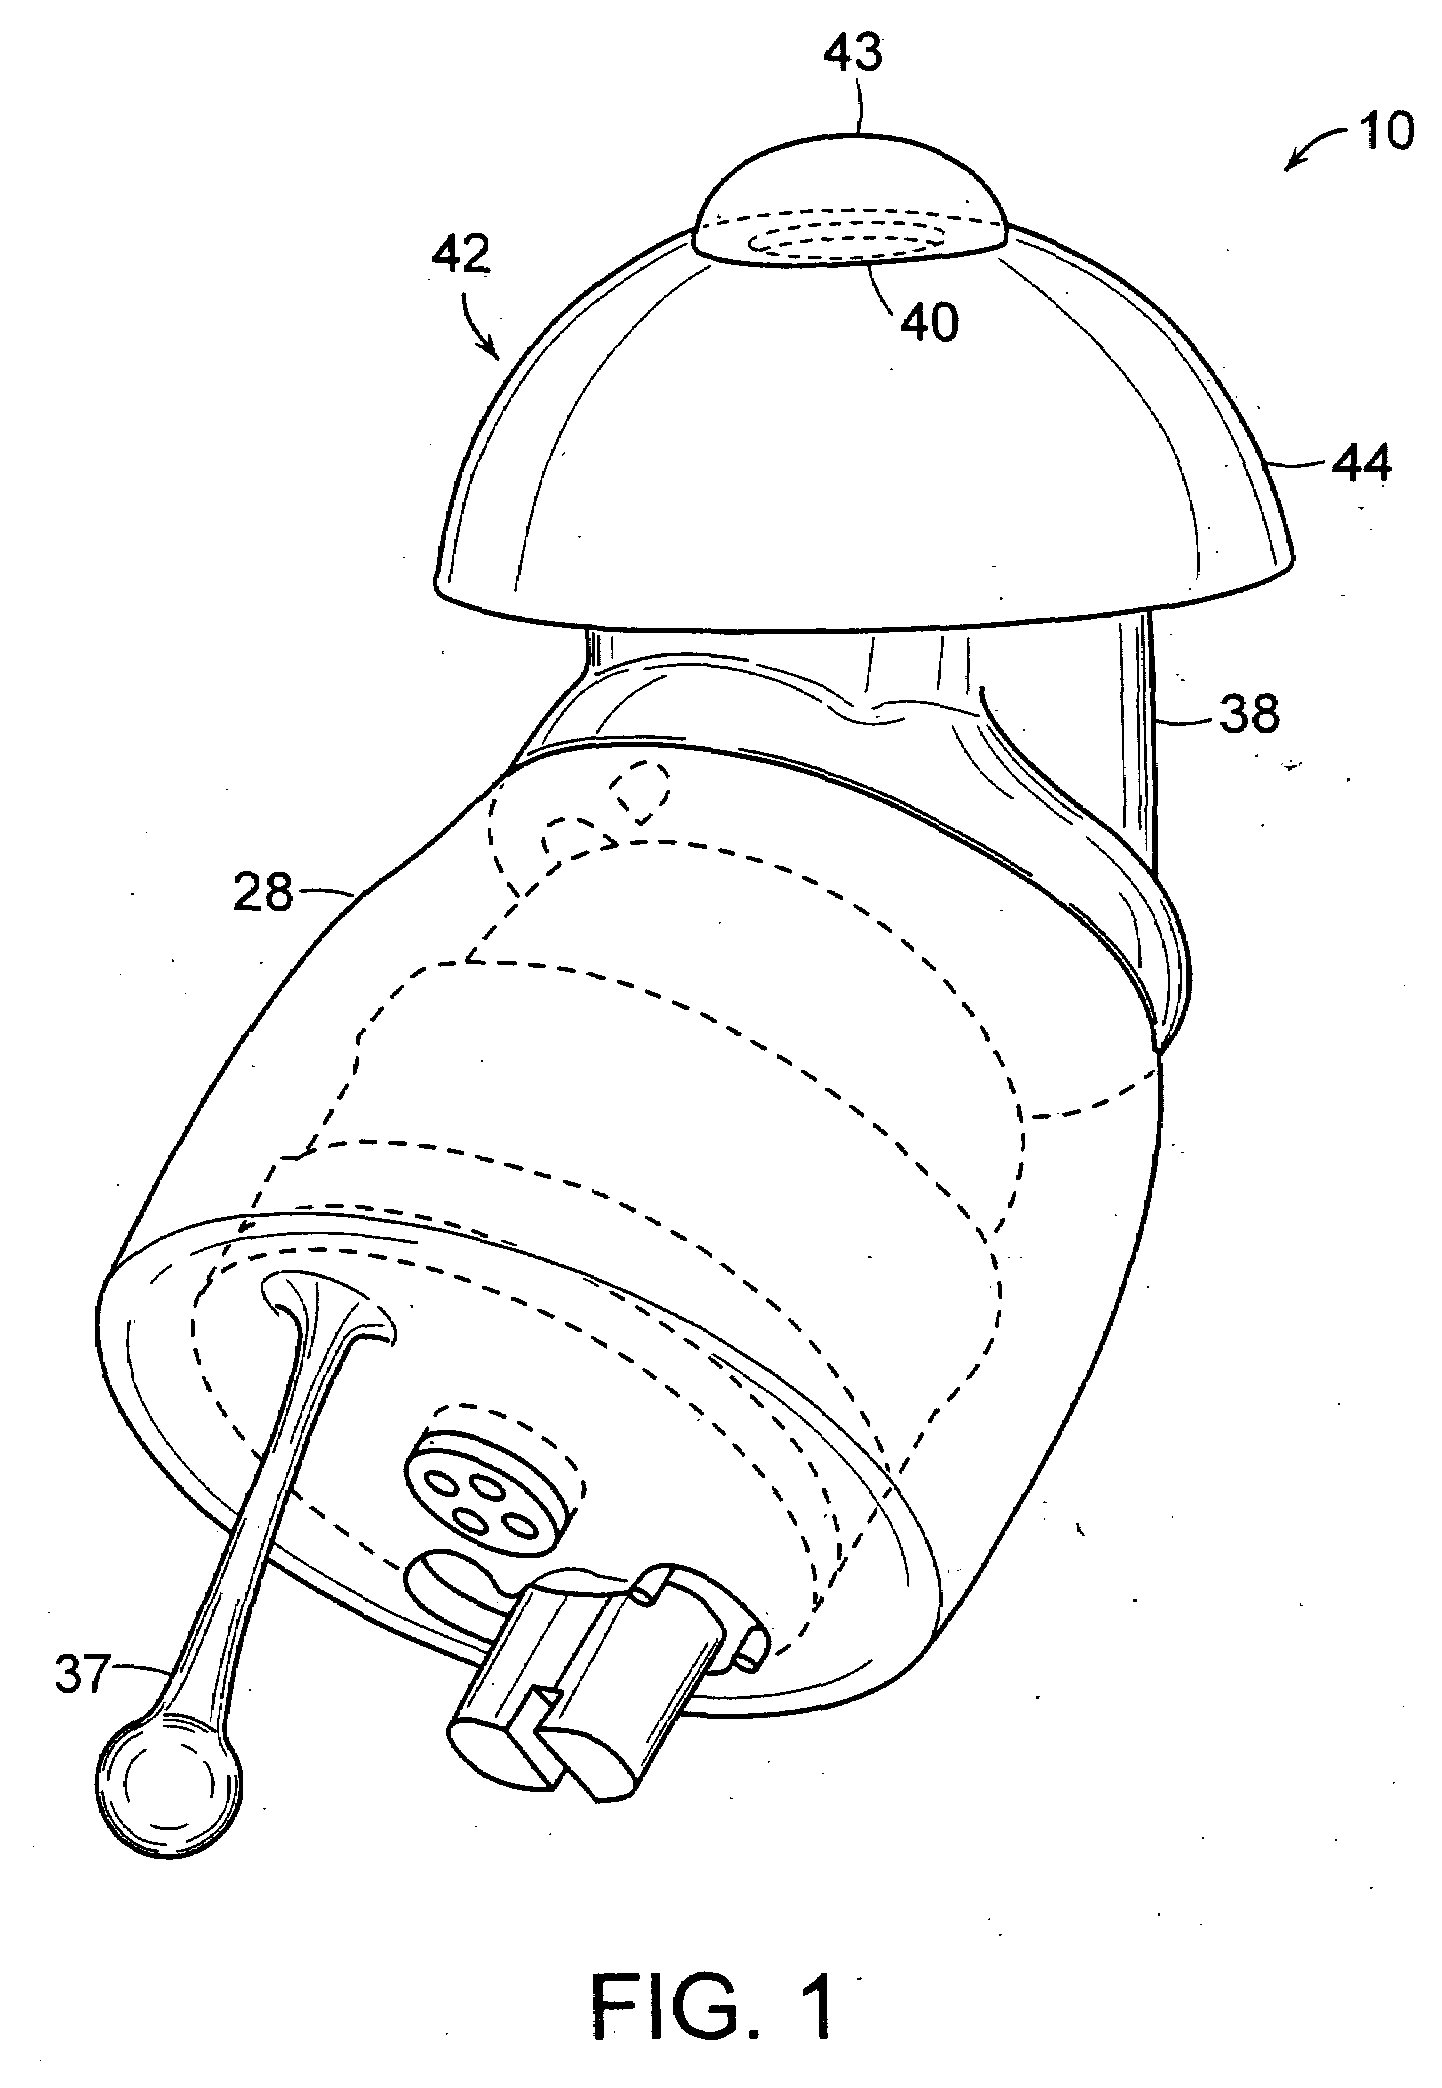 Hearing aid circuit with integrated switch and battery